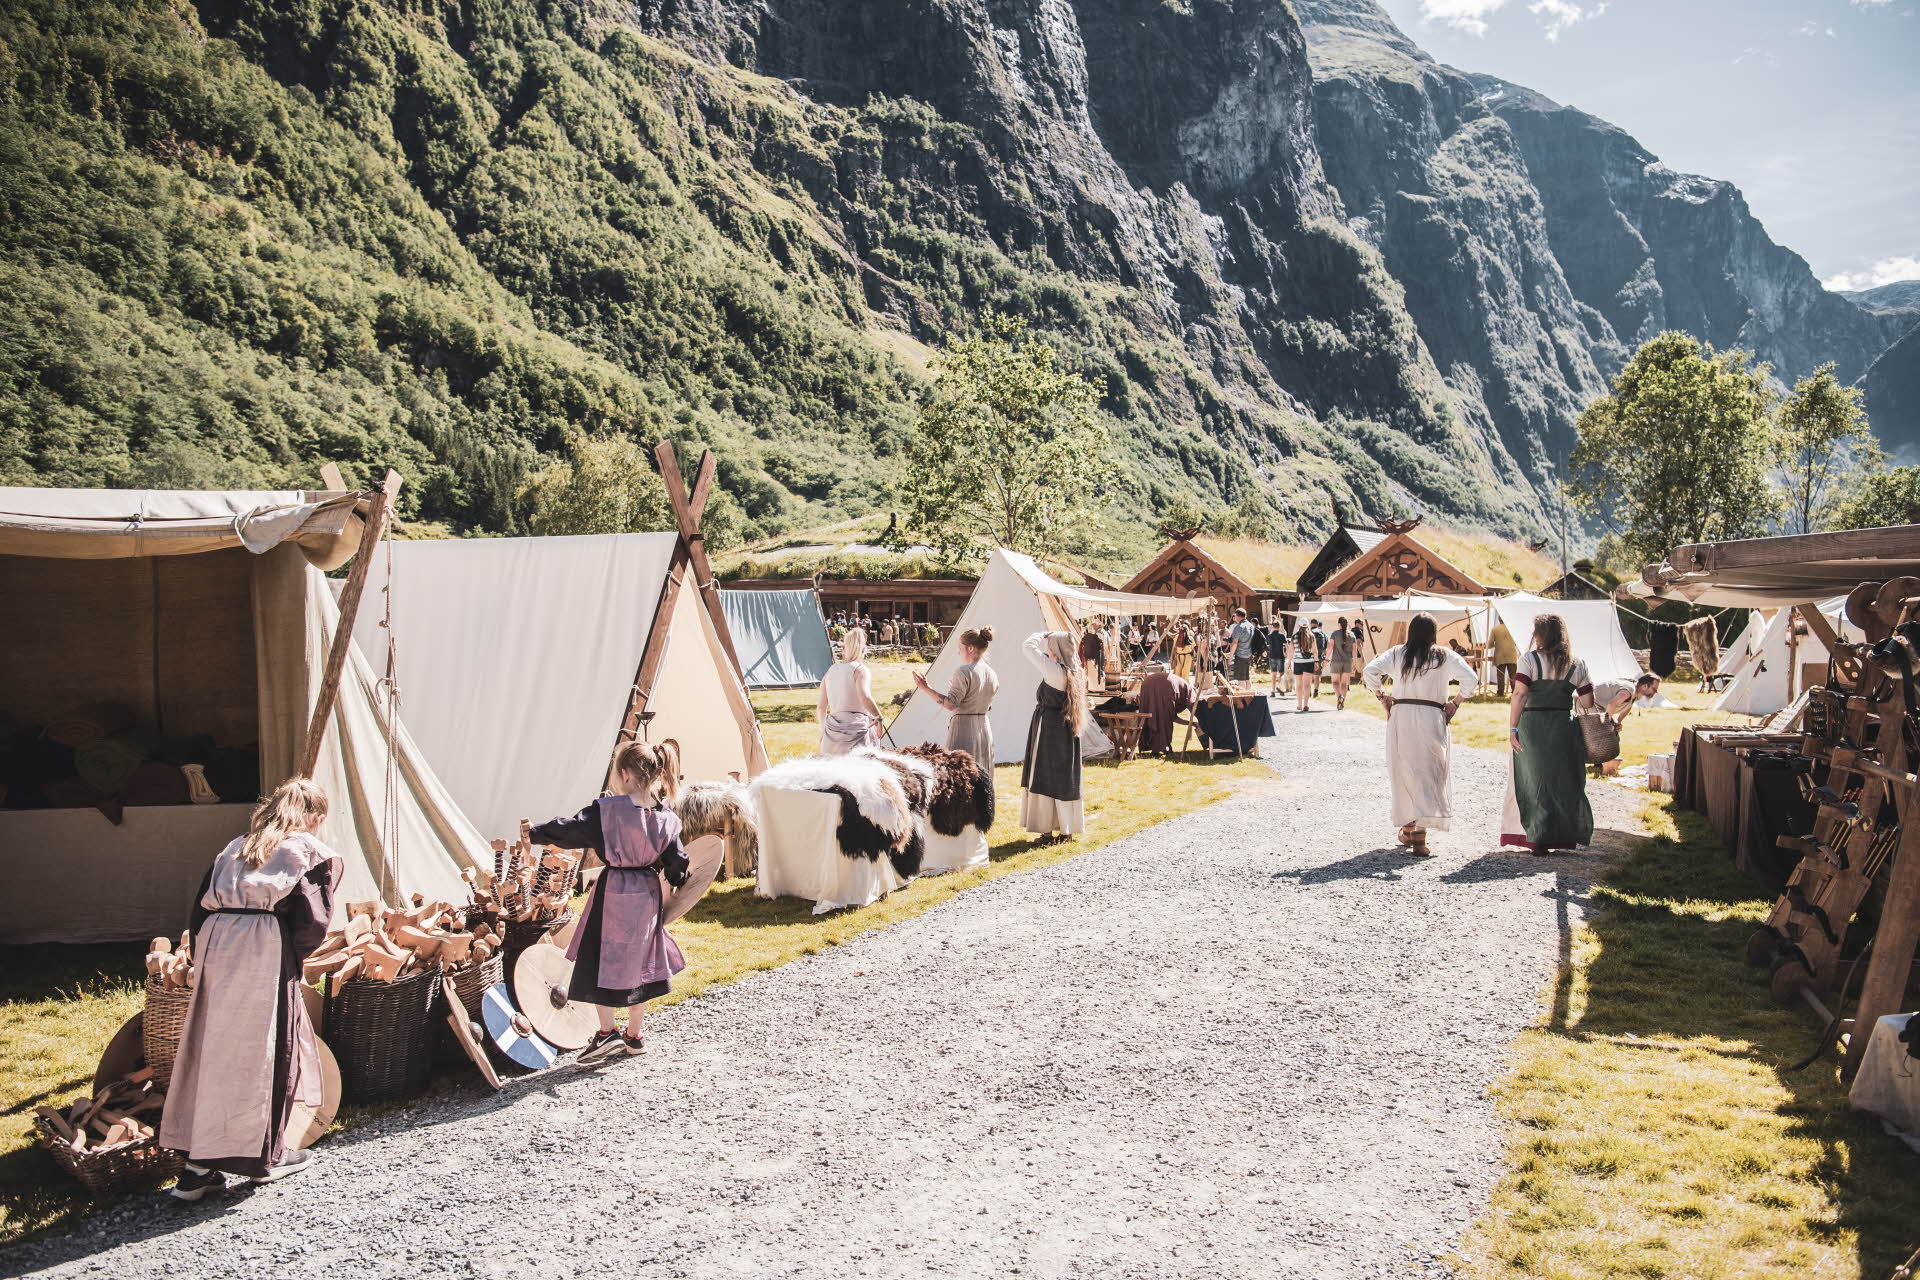 Children and adults in Viking clothes standing next to authentic tents in Gudvangen